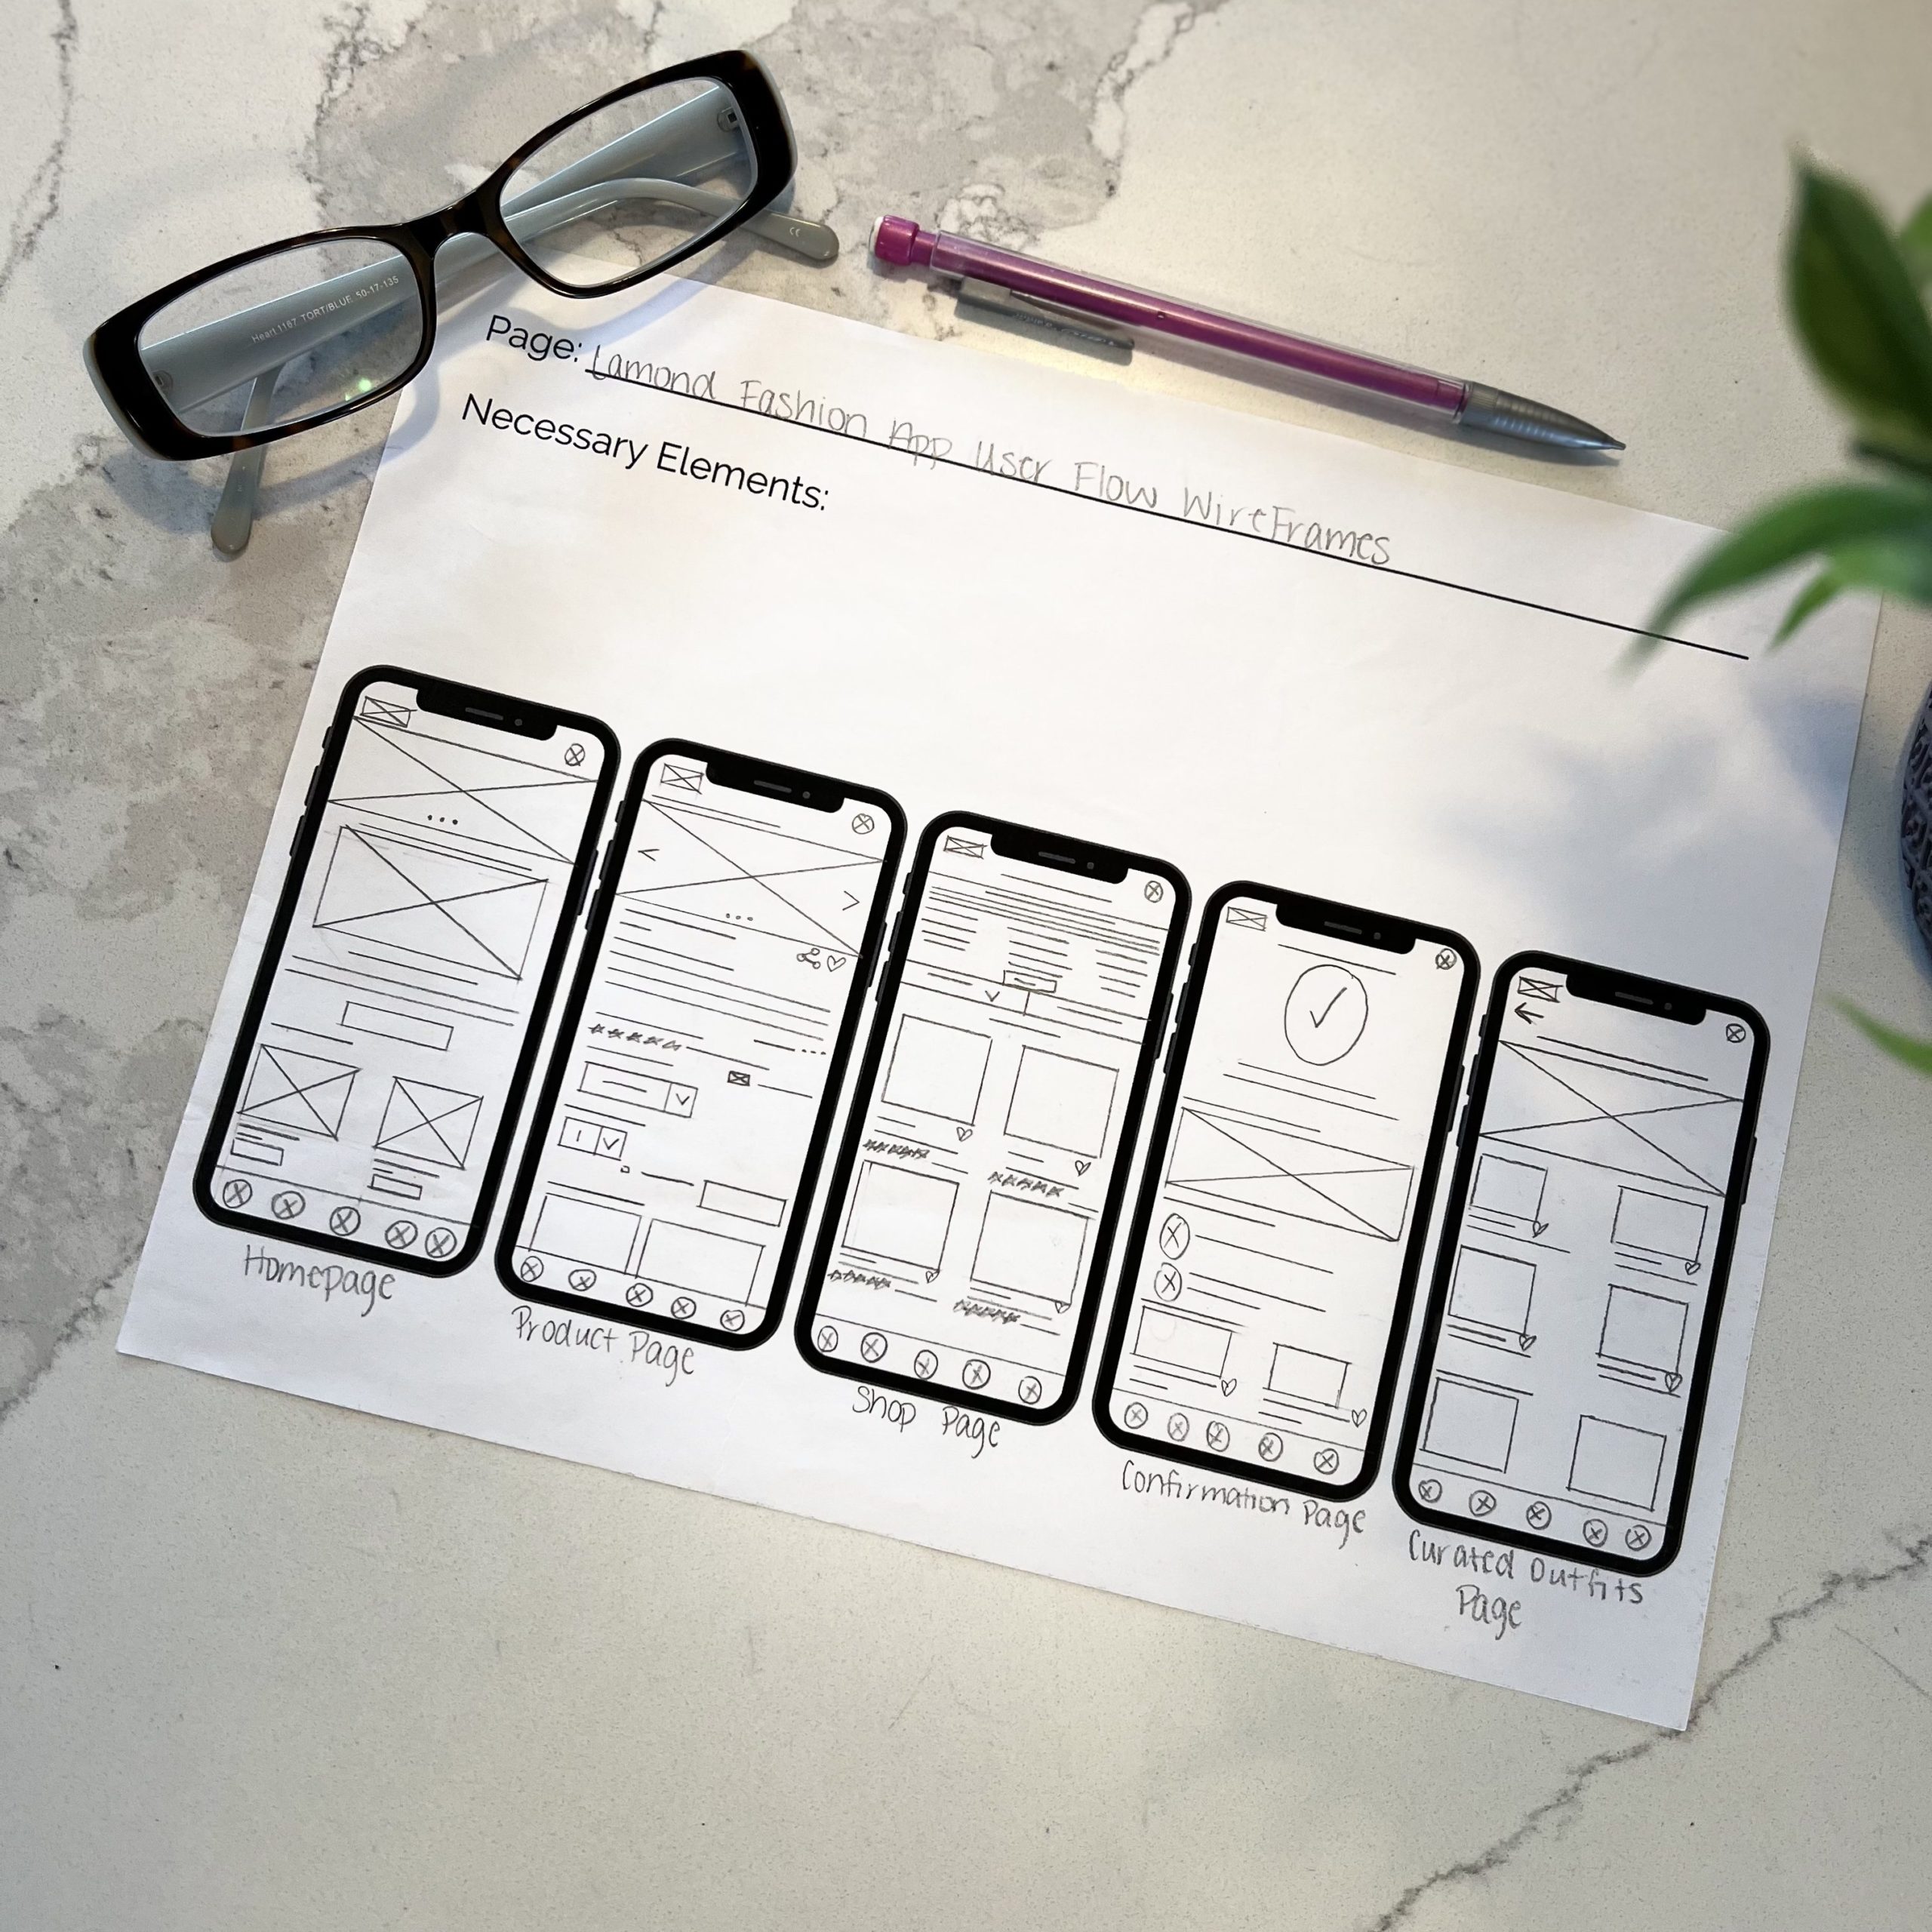 Final iterations of paper wireframes
